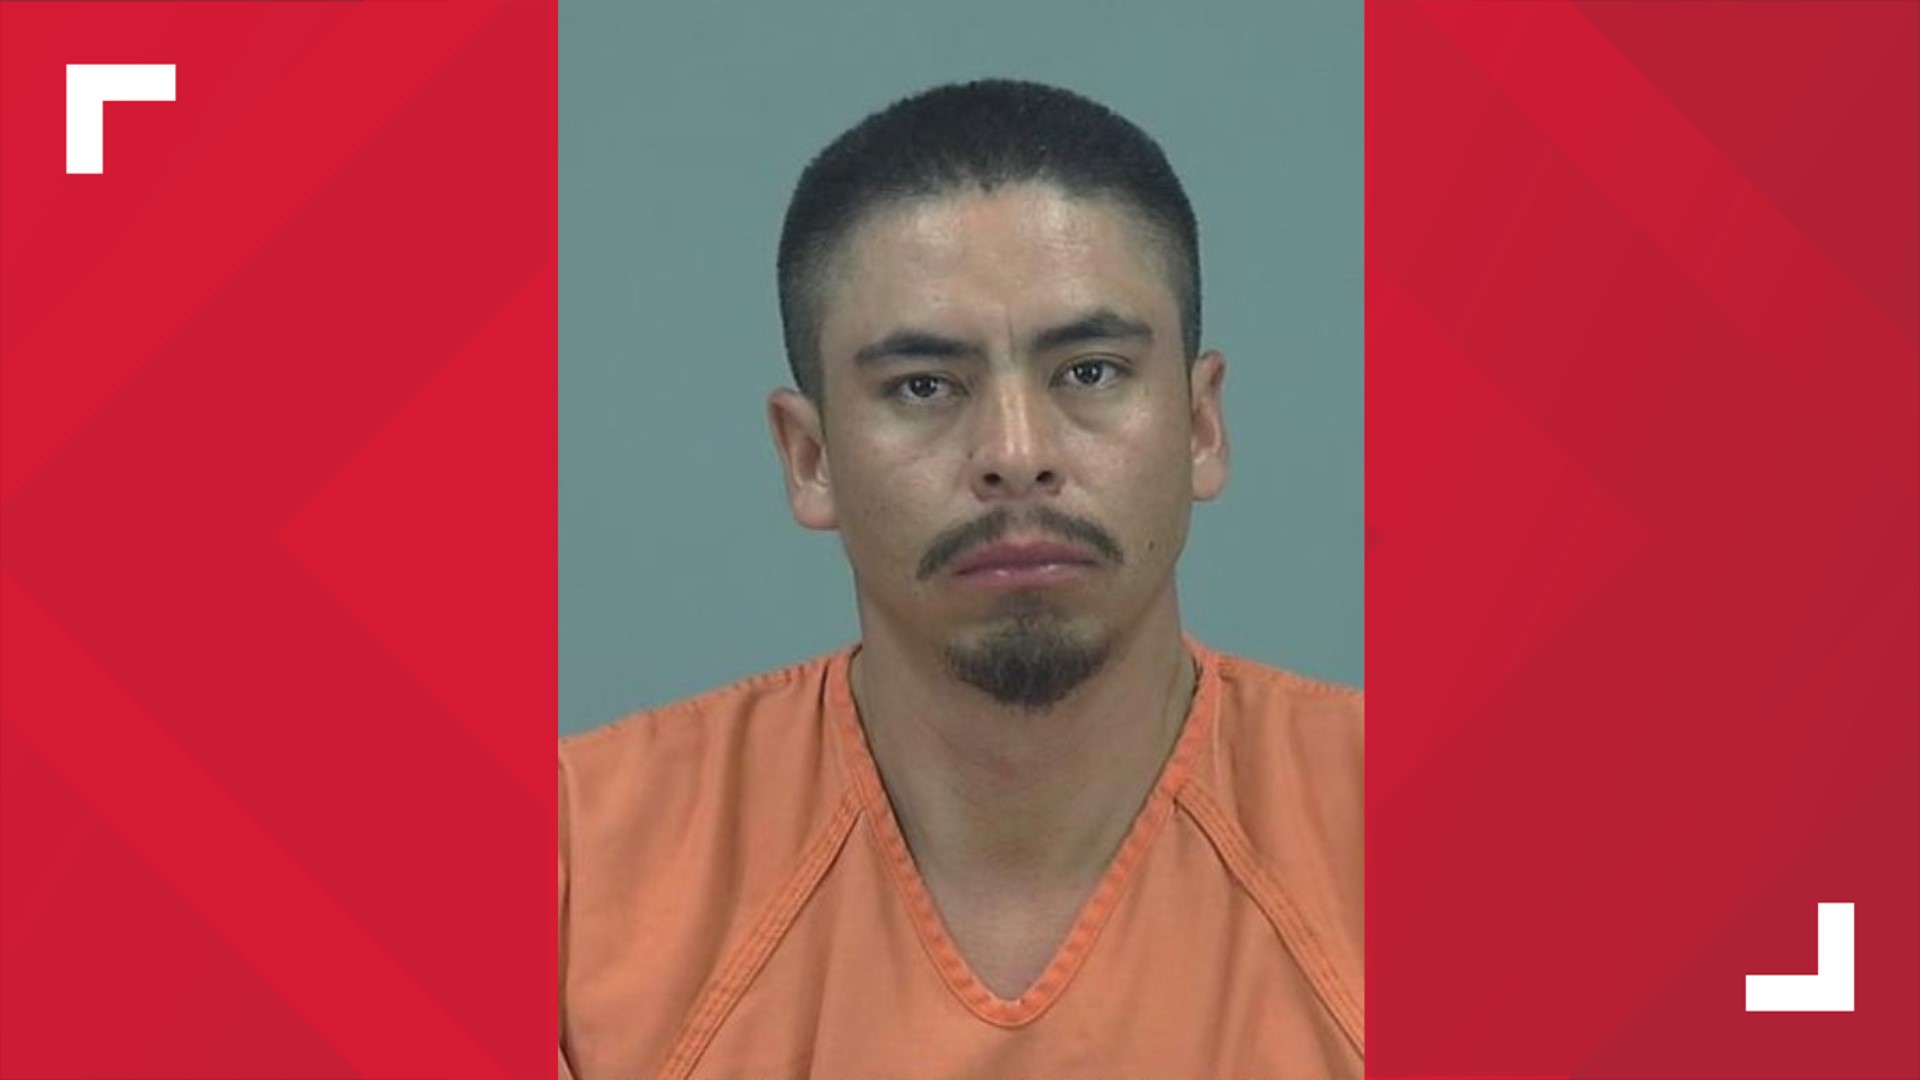 Ismael Hernandez is the main suspect in the death of his wife late Monday night, the Pinal County Sheriff's Office said.